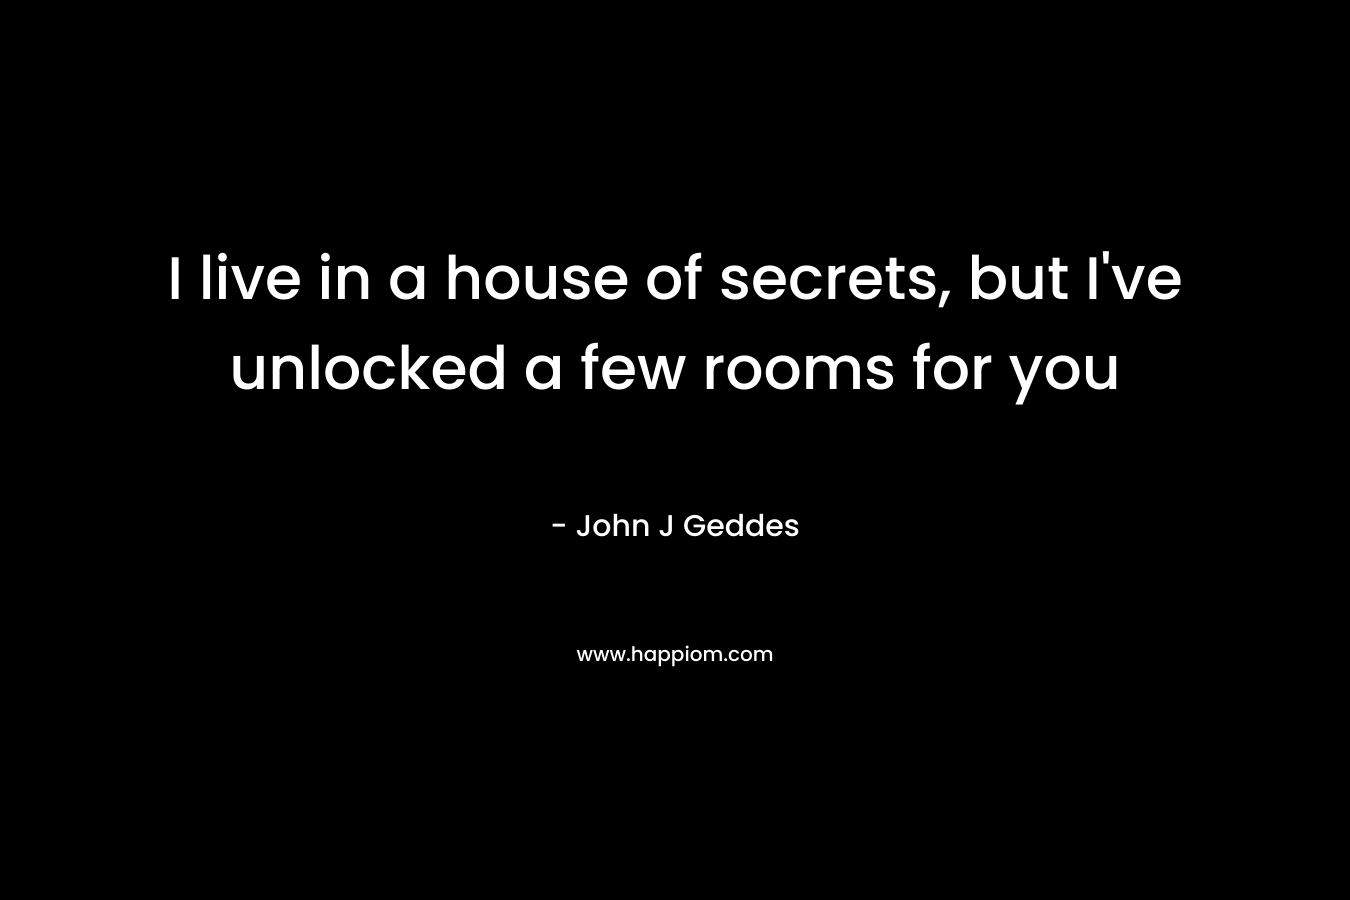 I live in a house of secrets, but I’ve unlocked a few rooms for you – John J Geddes